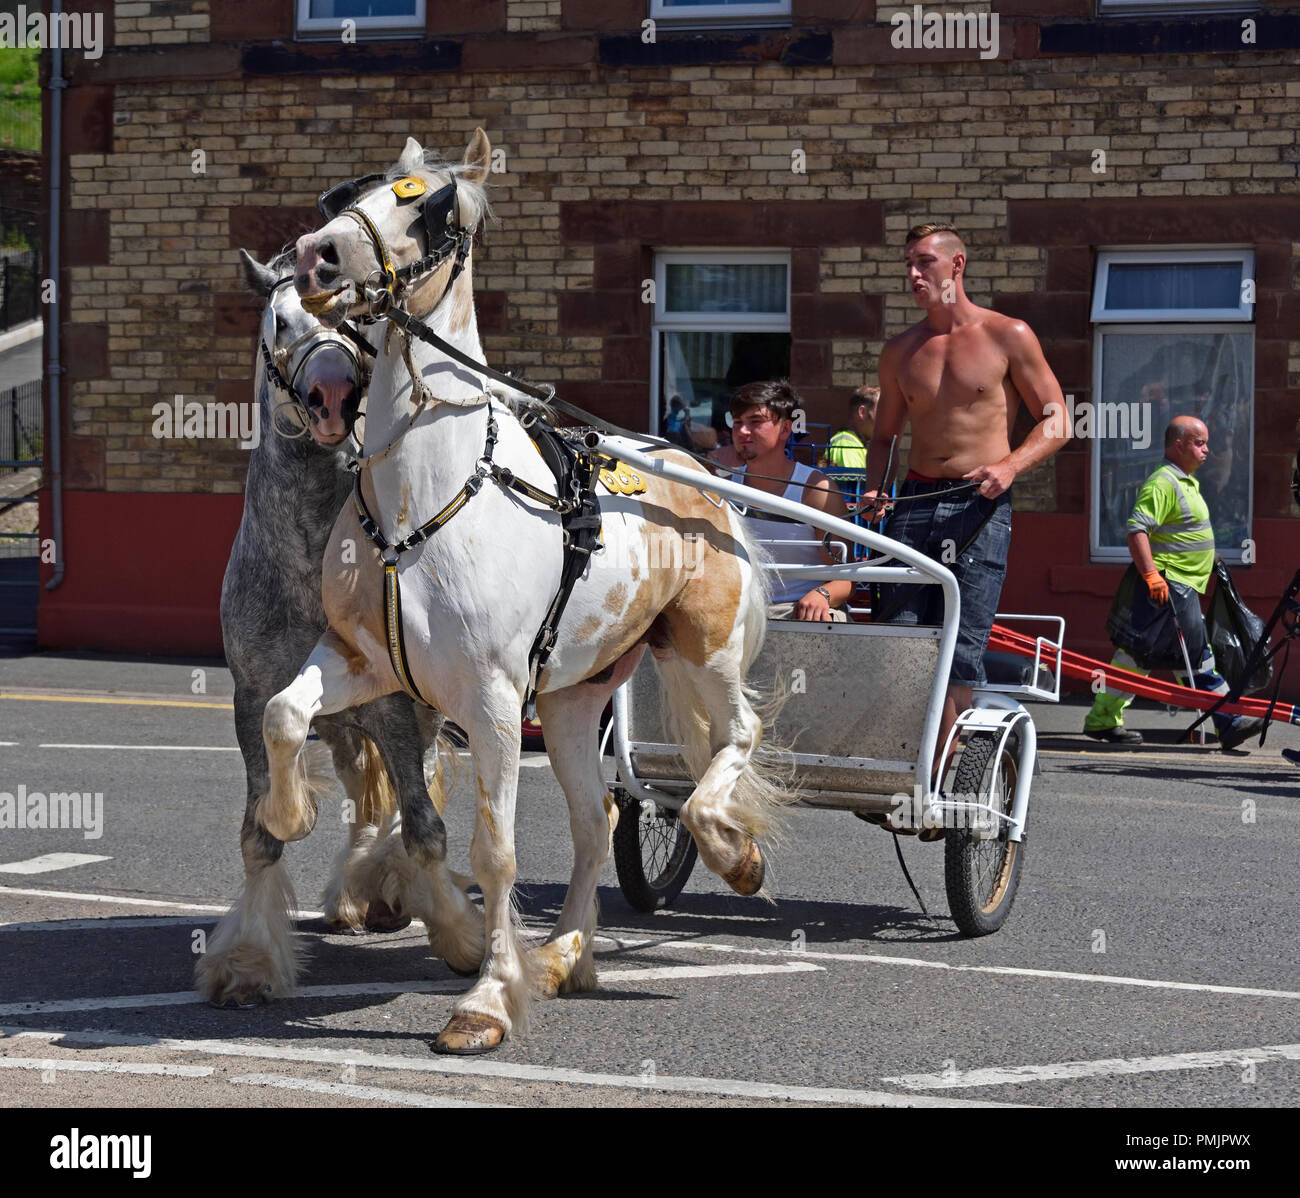 Two Gypsy Travellers riding on two horse trotting cart. Appleby Horse Fair 2018. The Sands, Appleby-in-Westmorland, Cumbria, England, United Kingdom. Stock Photo